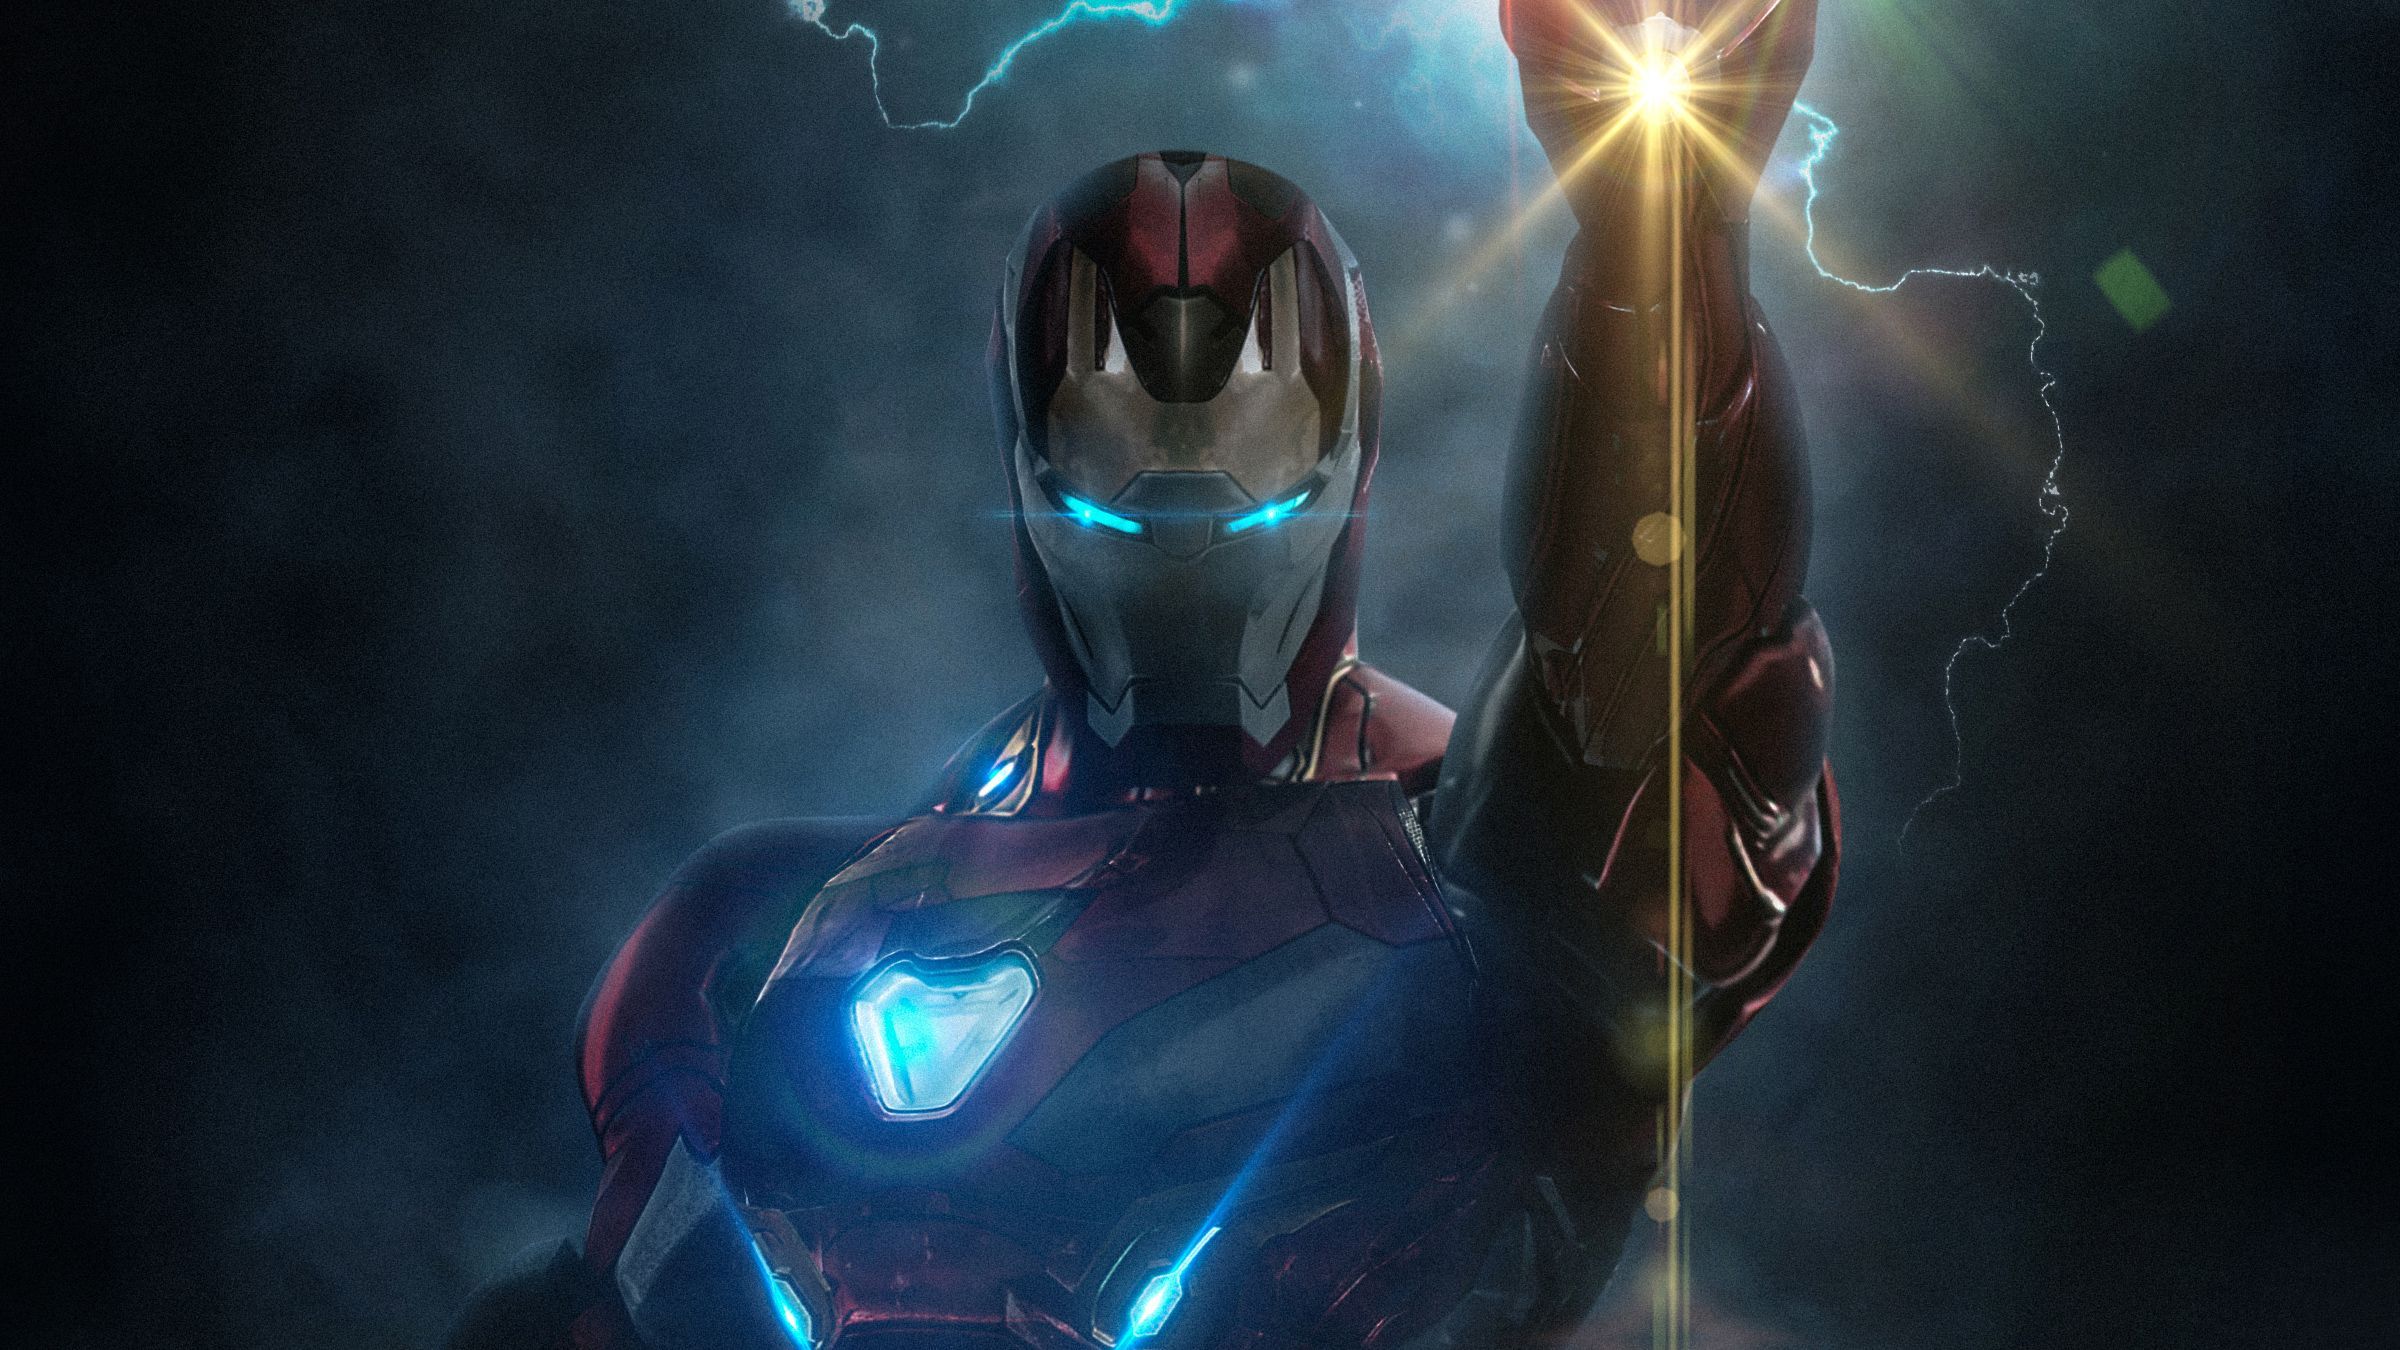 Movie Avengers End Game Ironman With Super Power Wallpaper